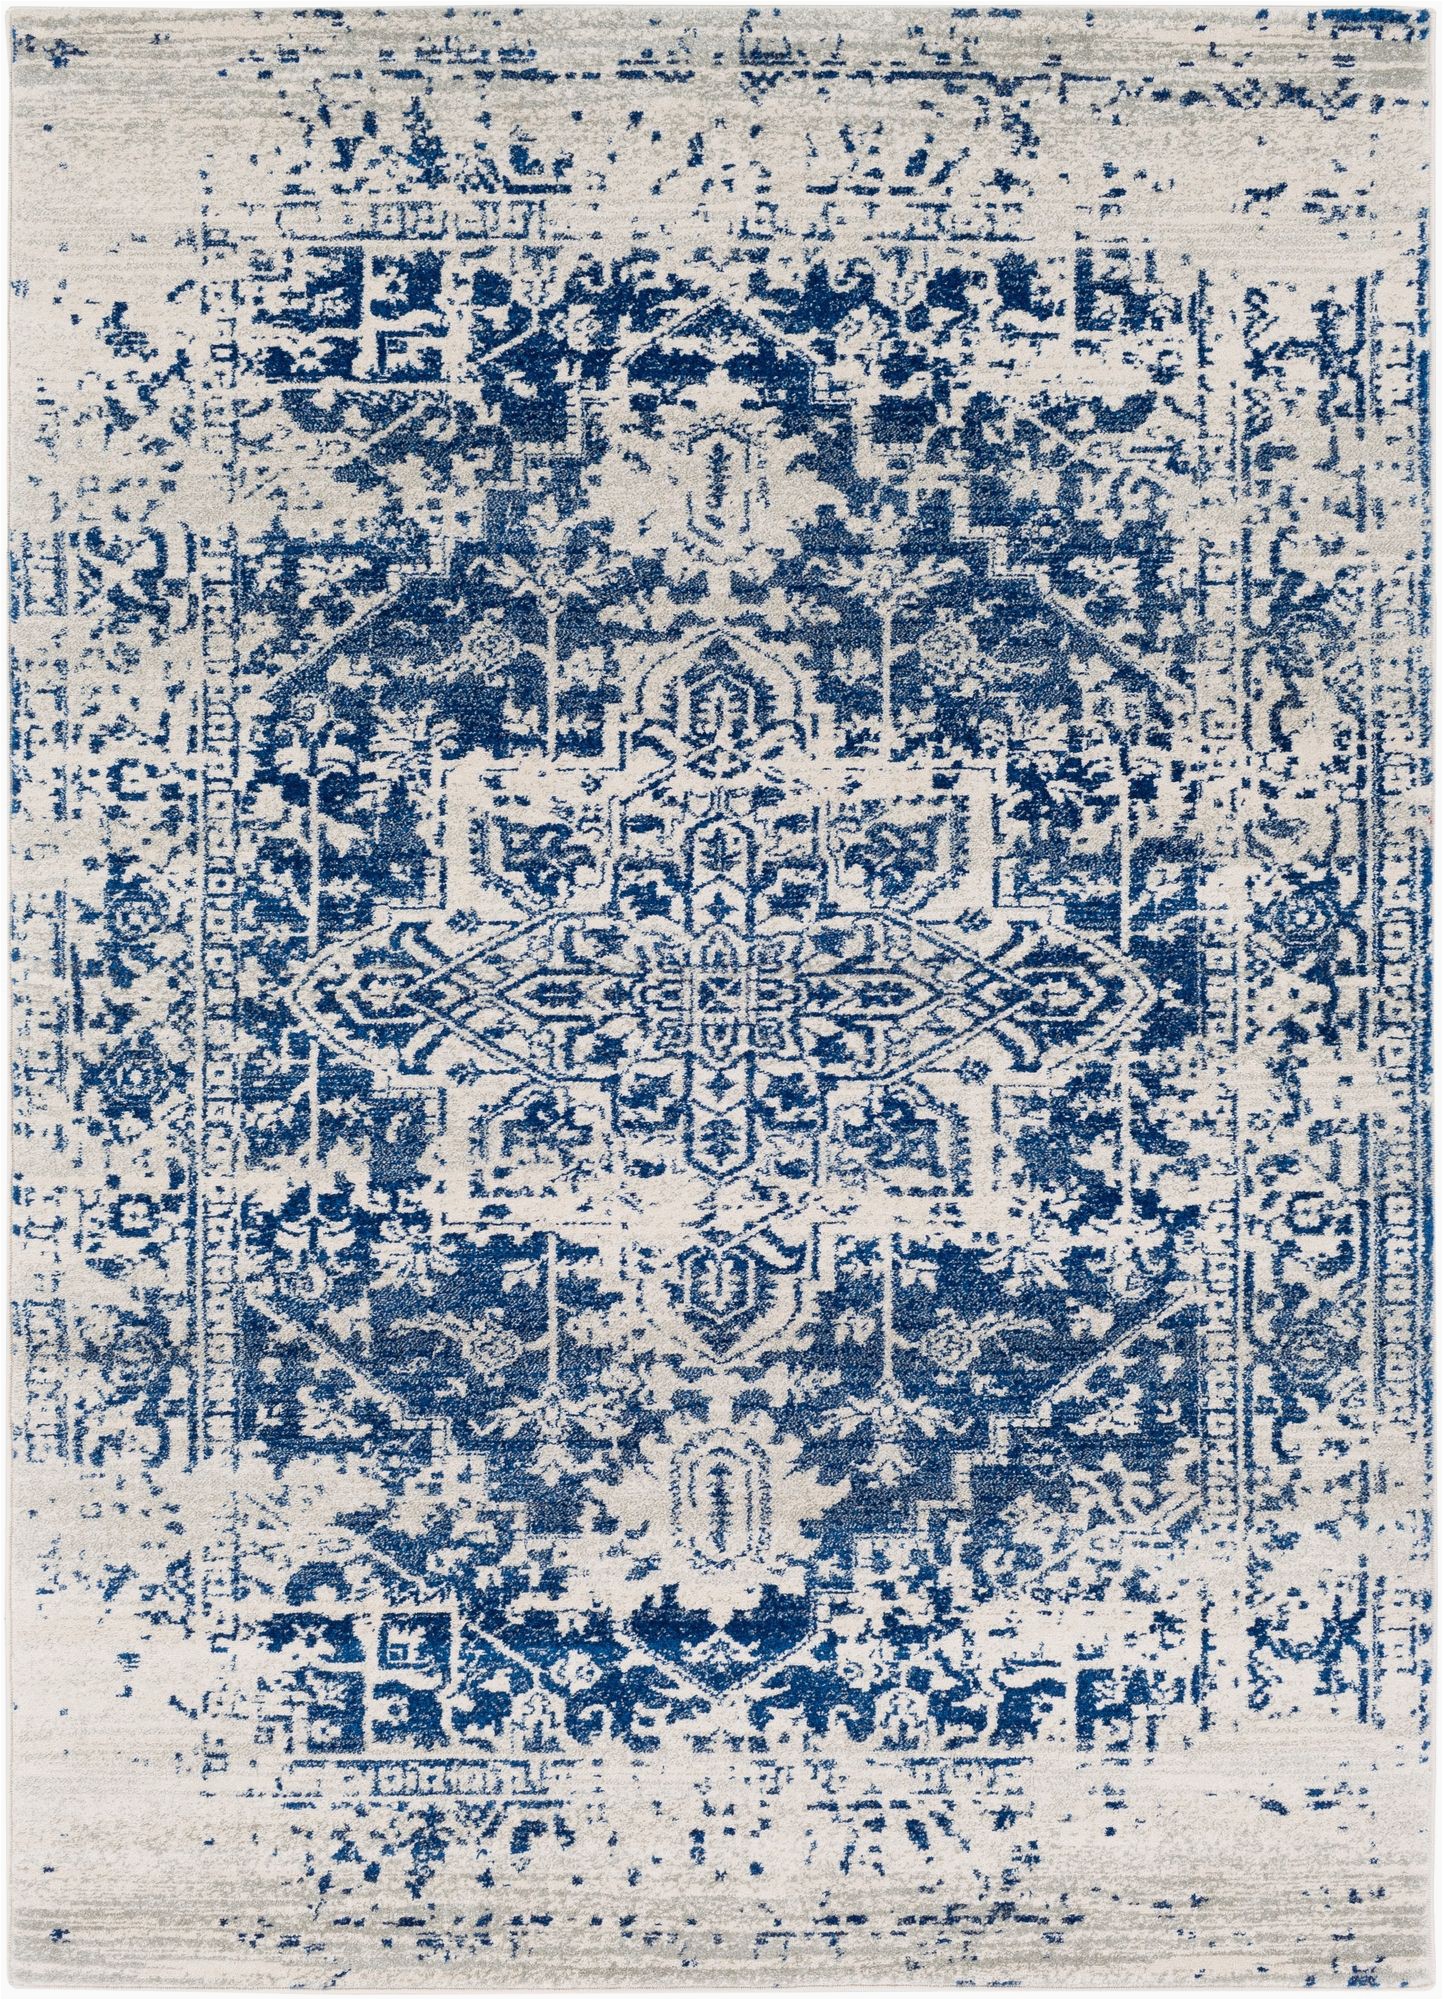 Home Accents Harput area Rug Home Accents Harput area Rug Dark Blue Pale Gray Beige In